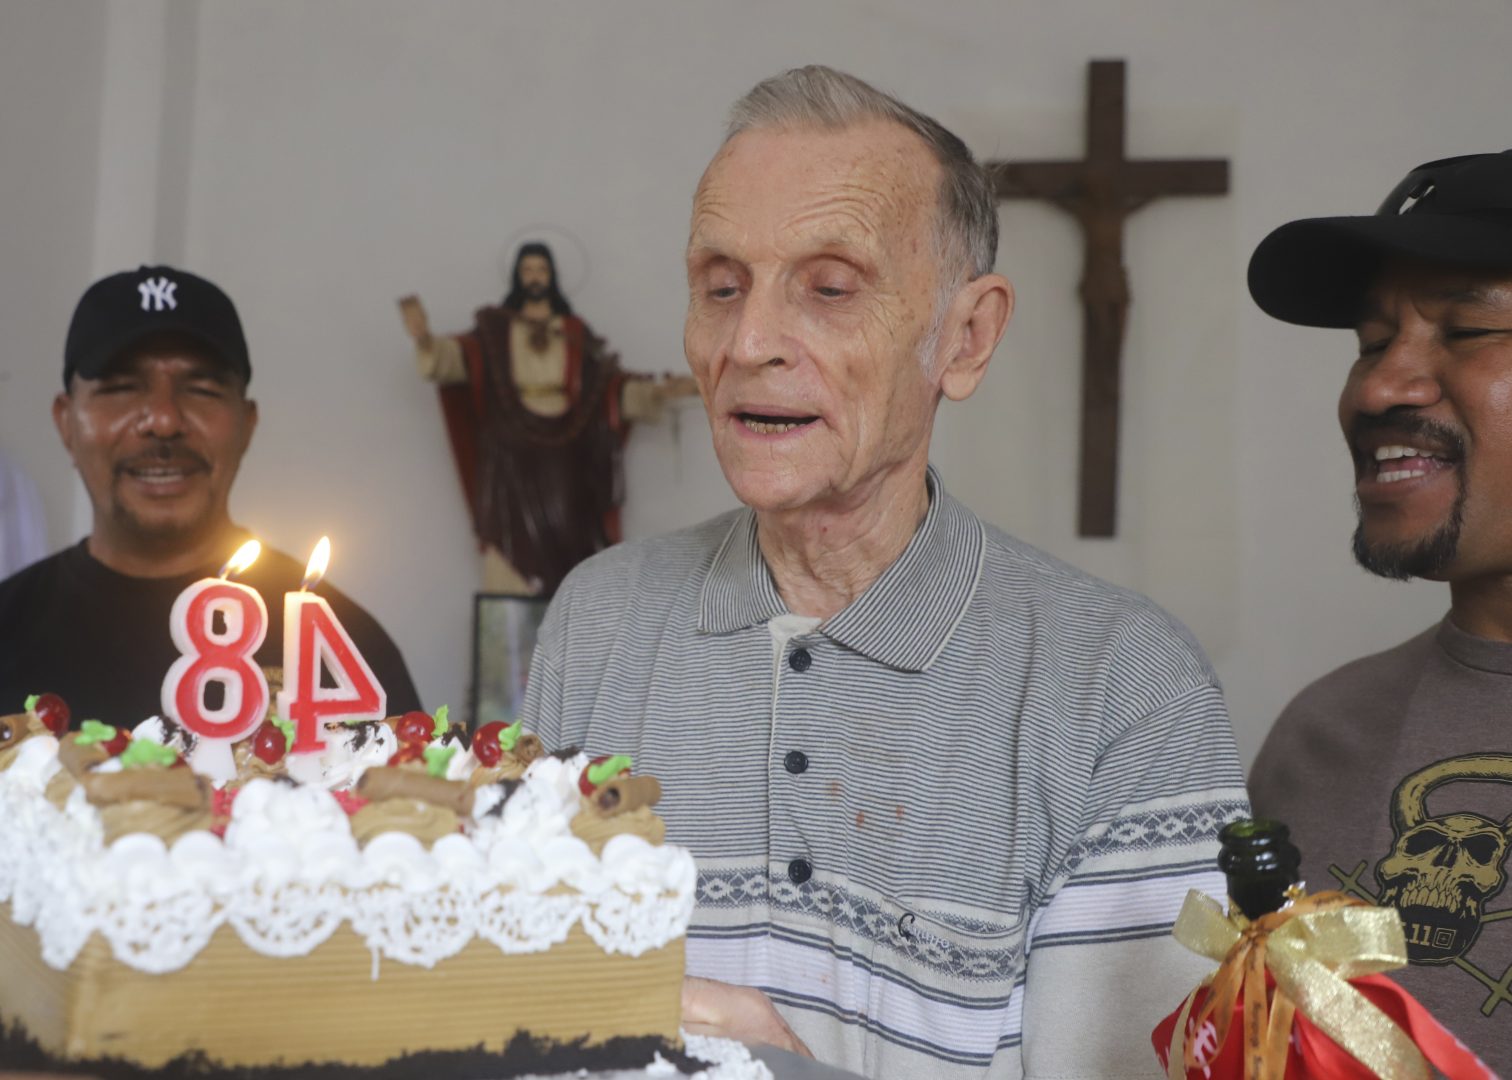 Now-defrocked Catholic priest Richard Daschbach, center, is presented a cake during his 84th birthday in Dili, East Timor, on Tuesday, Jan. 26, 2021. While he has his critics, Daschbach’s support appears deep and widespread, extending beyond Oecusse to the capital, Dili. It includes members of the political elite, including former President Xanana Gusmao  _ himself an independence hero _  who attended the opening of the trial in February, and this birthday celebration. 